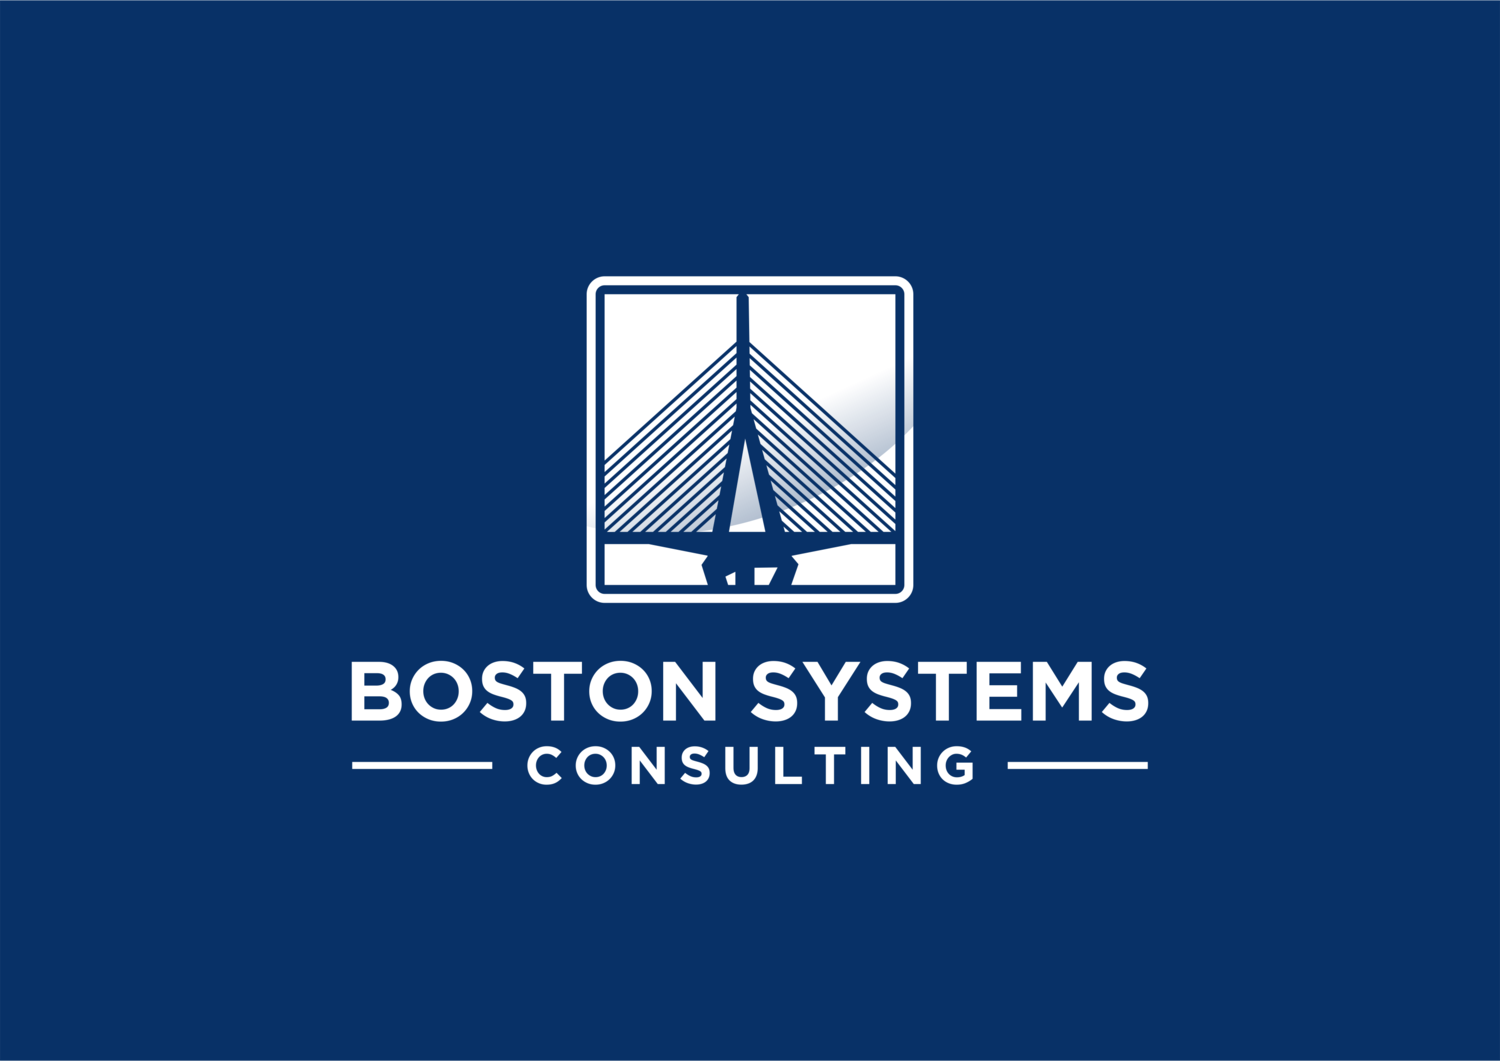 Boston Systems Consulting